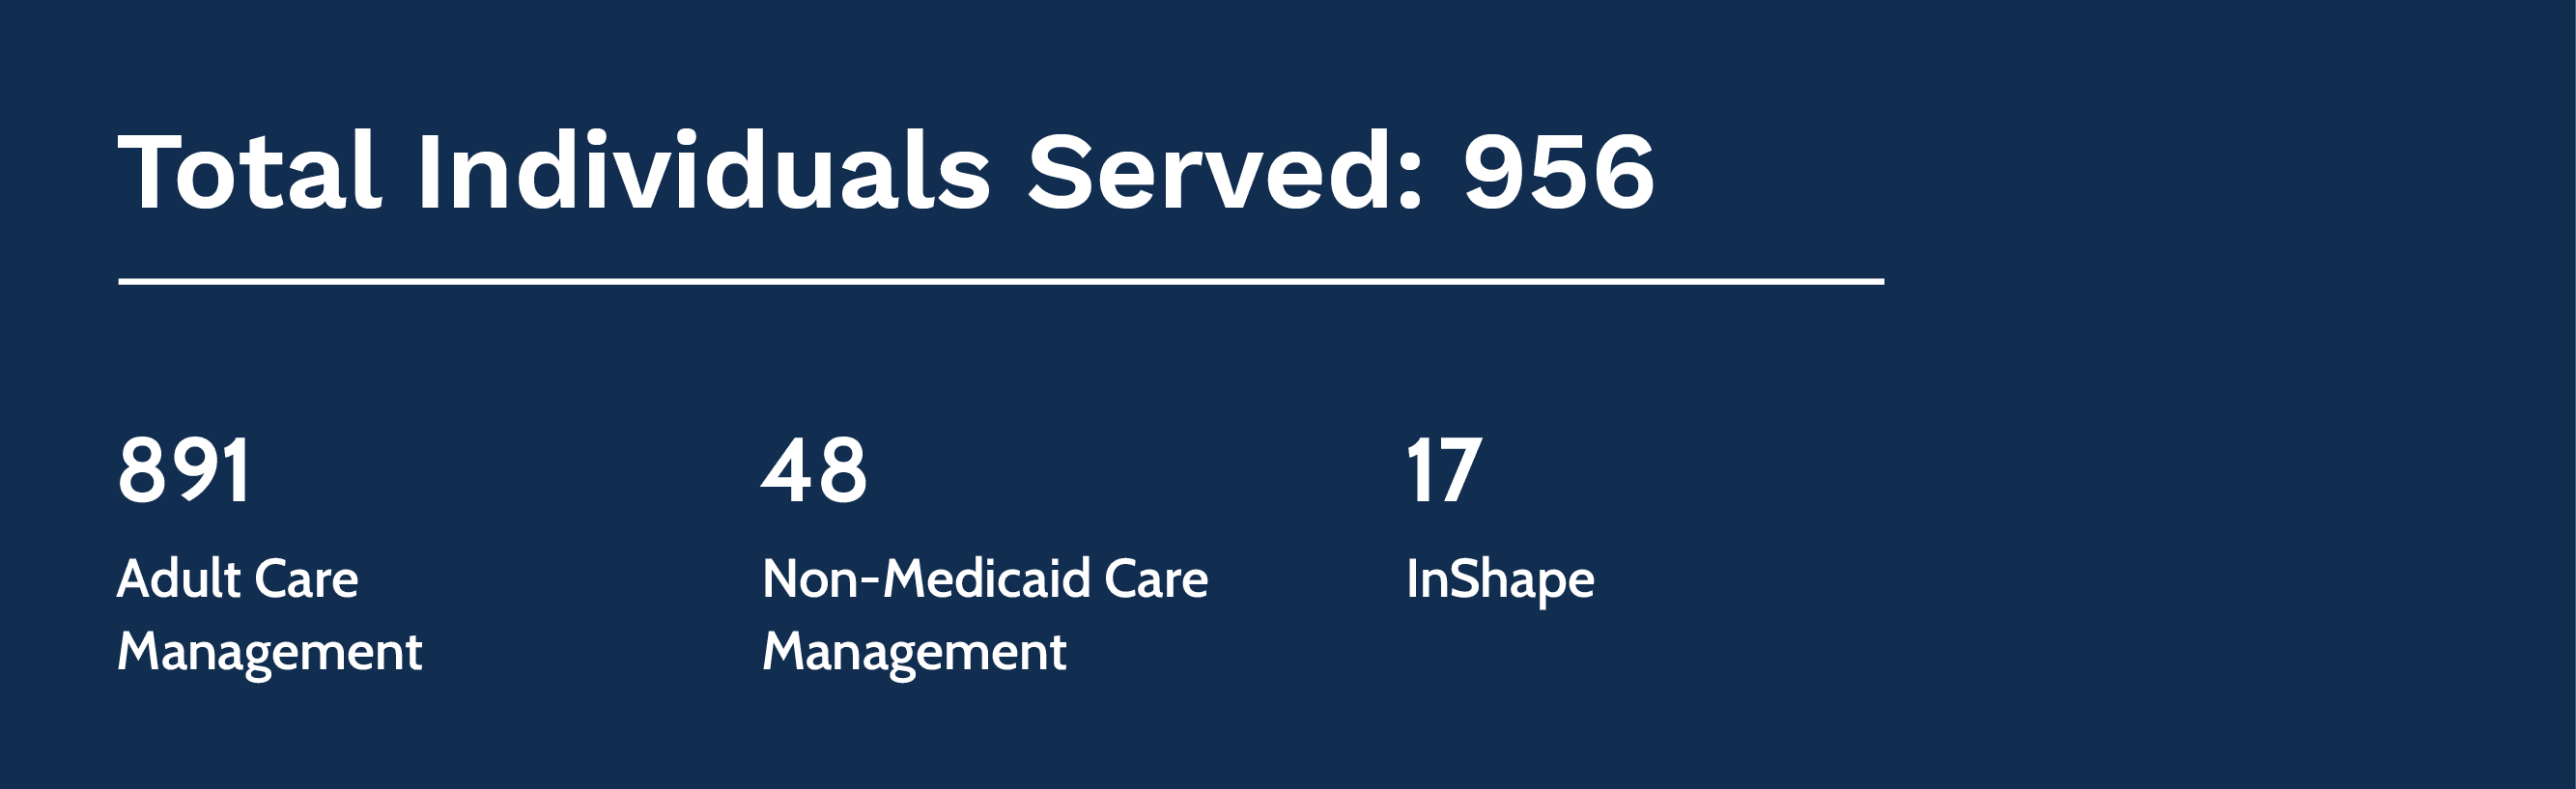 Community Health total served = 956; Adult Care Management = 891; Non-Medicaid Care Management = 48; InShape = 17